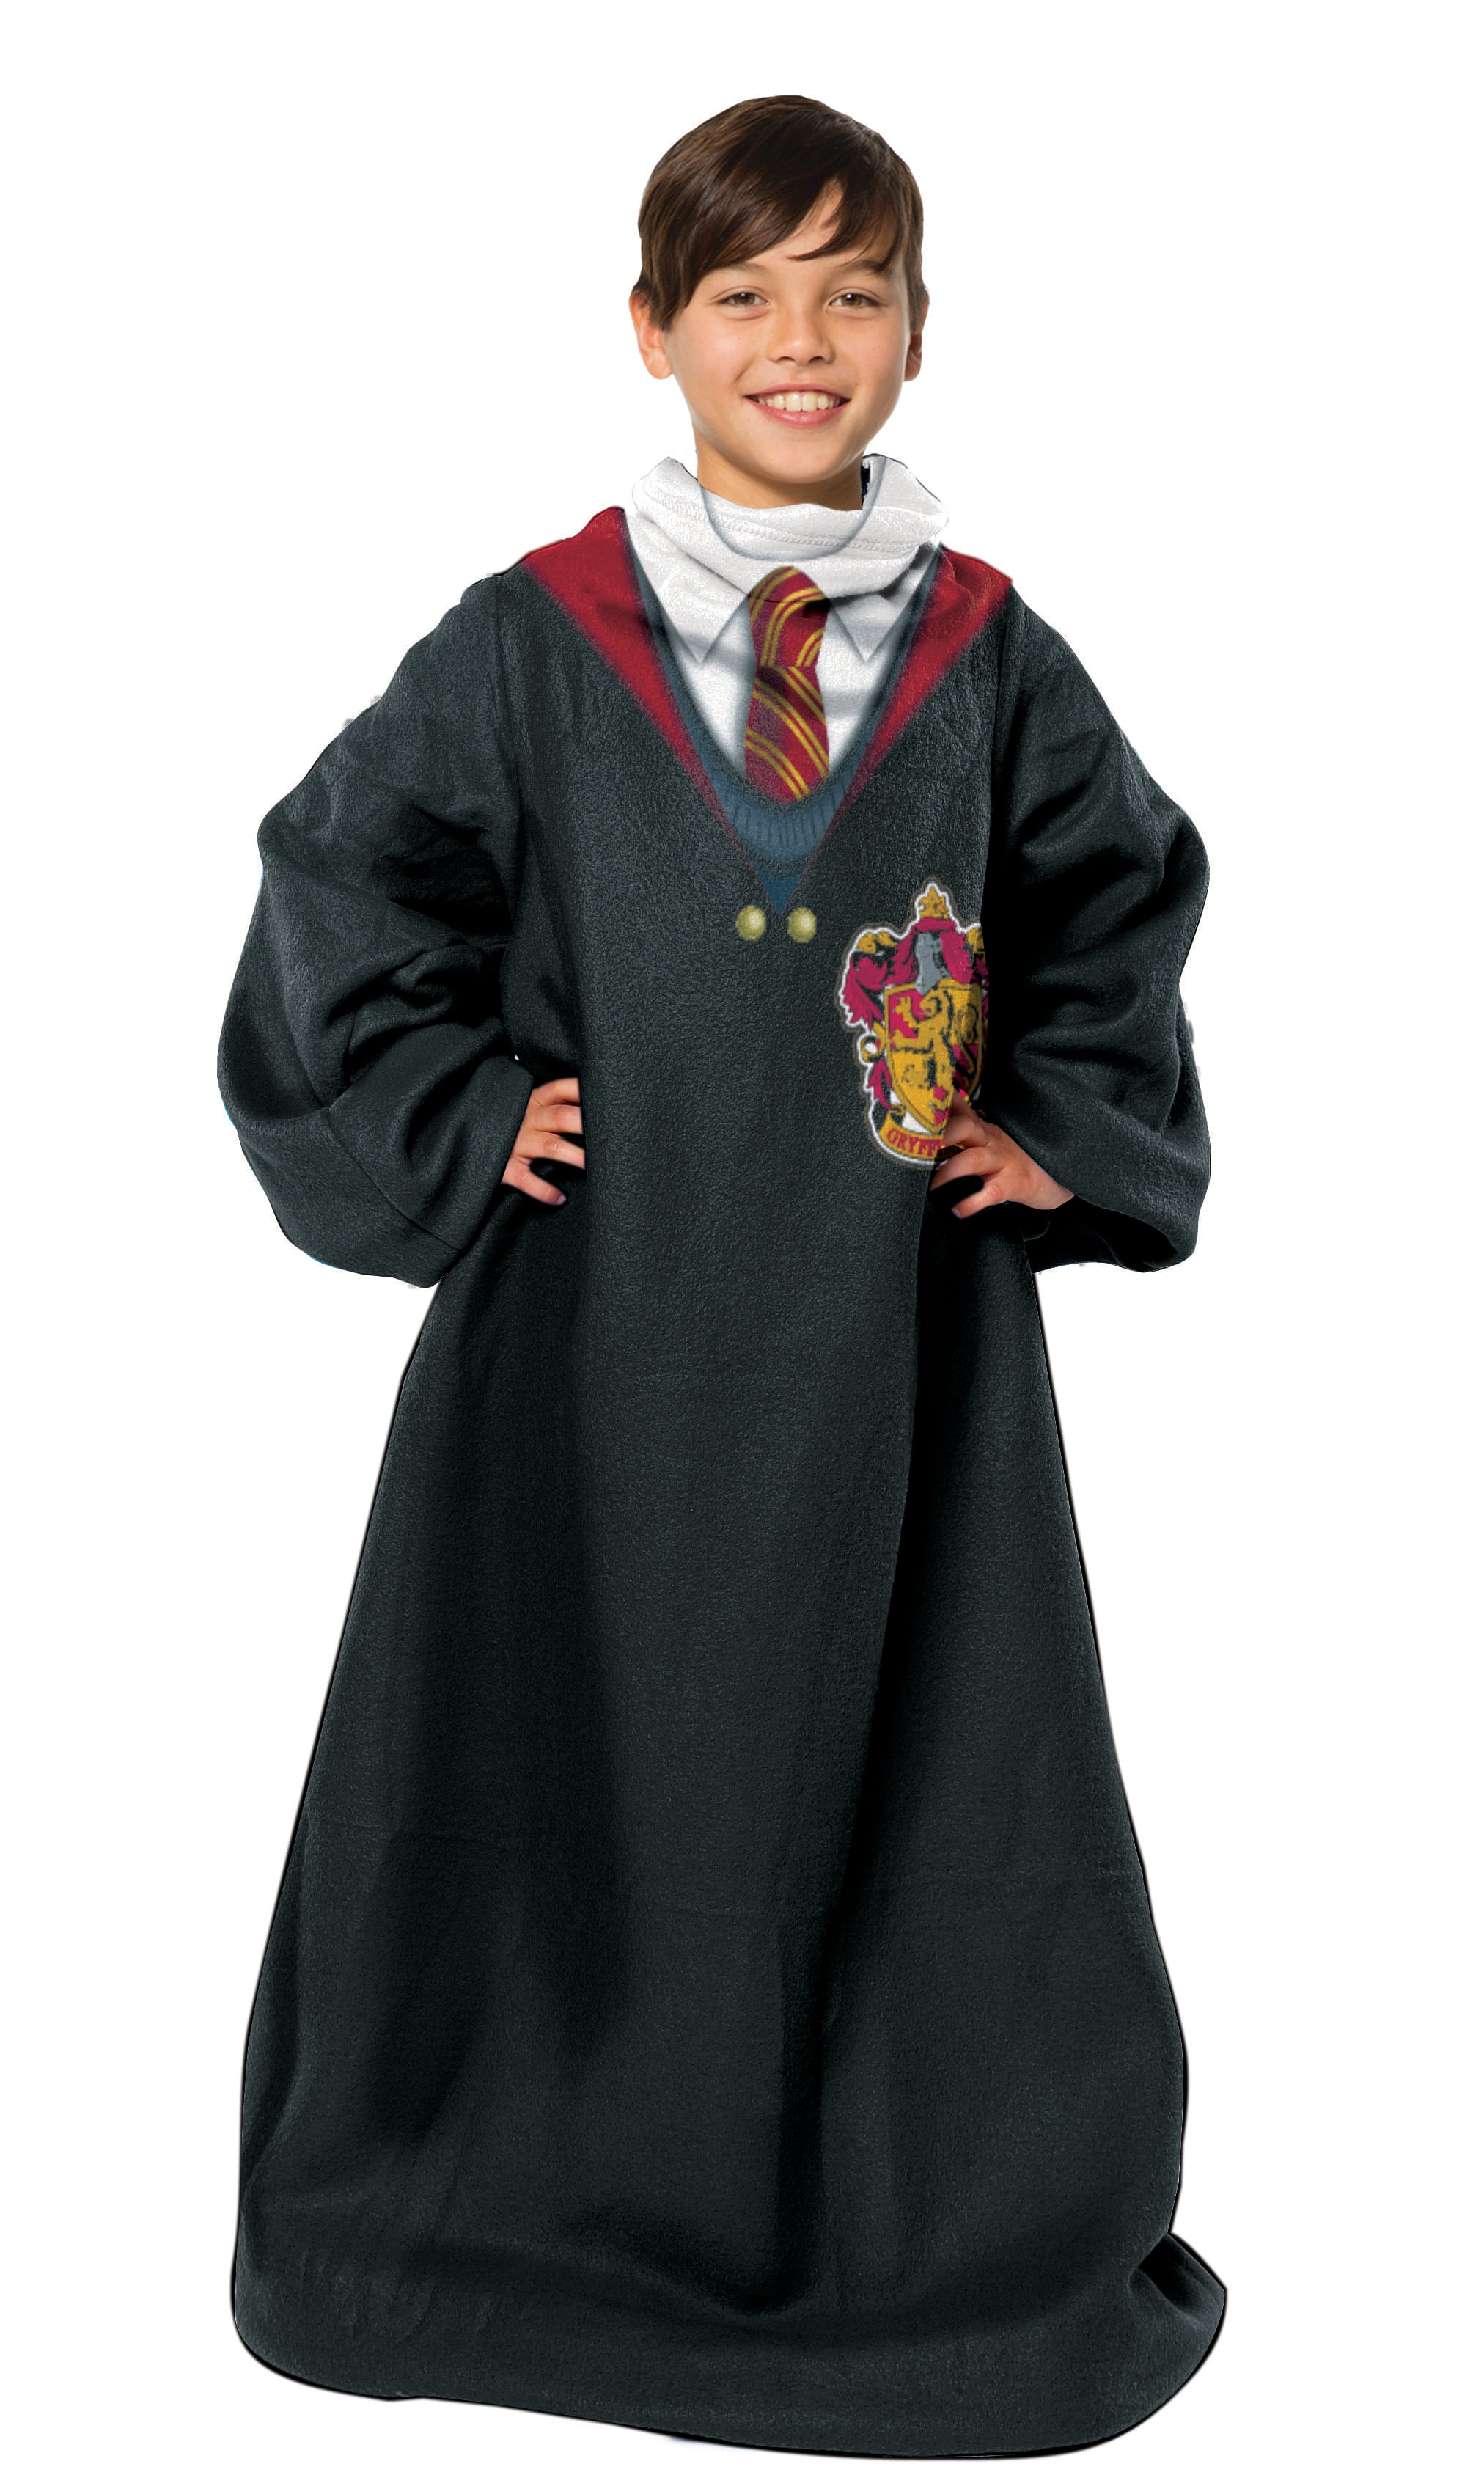 Harry Potter First Years Kids Silk Touch Comfy Throw With Sleeves